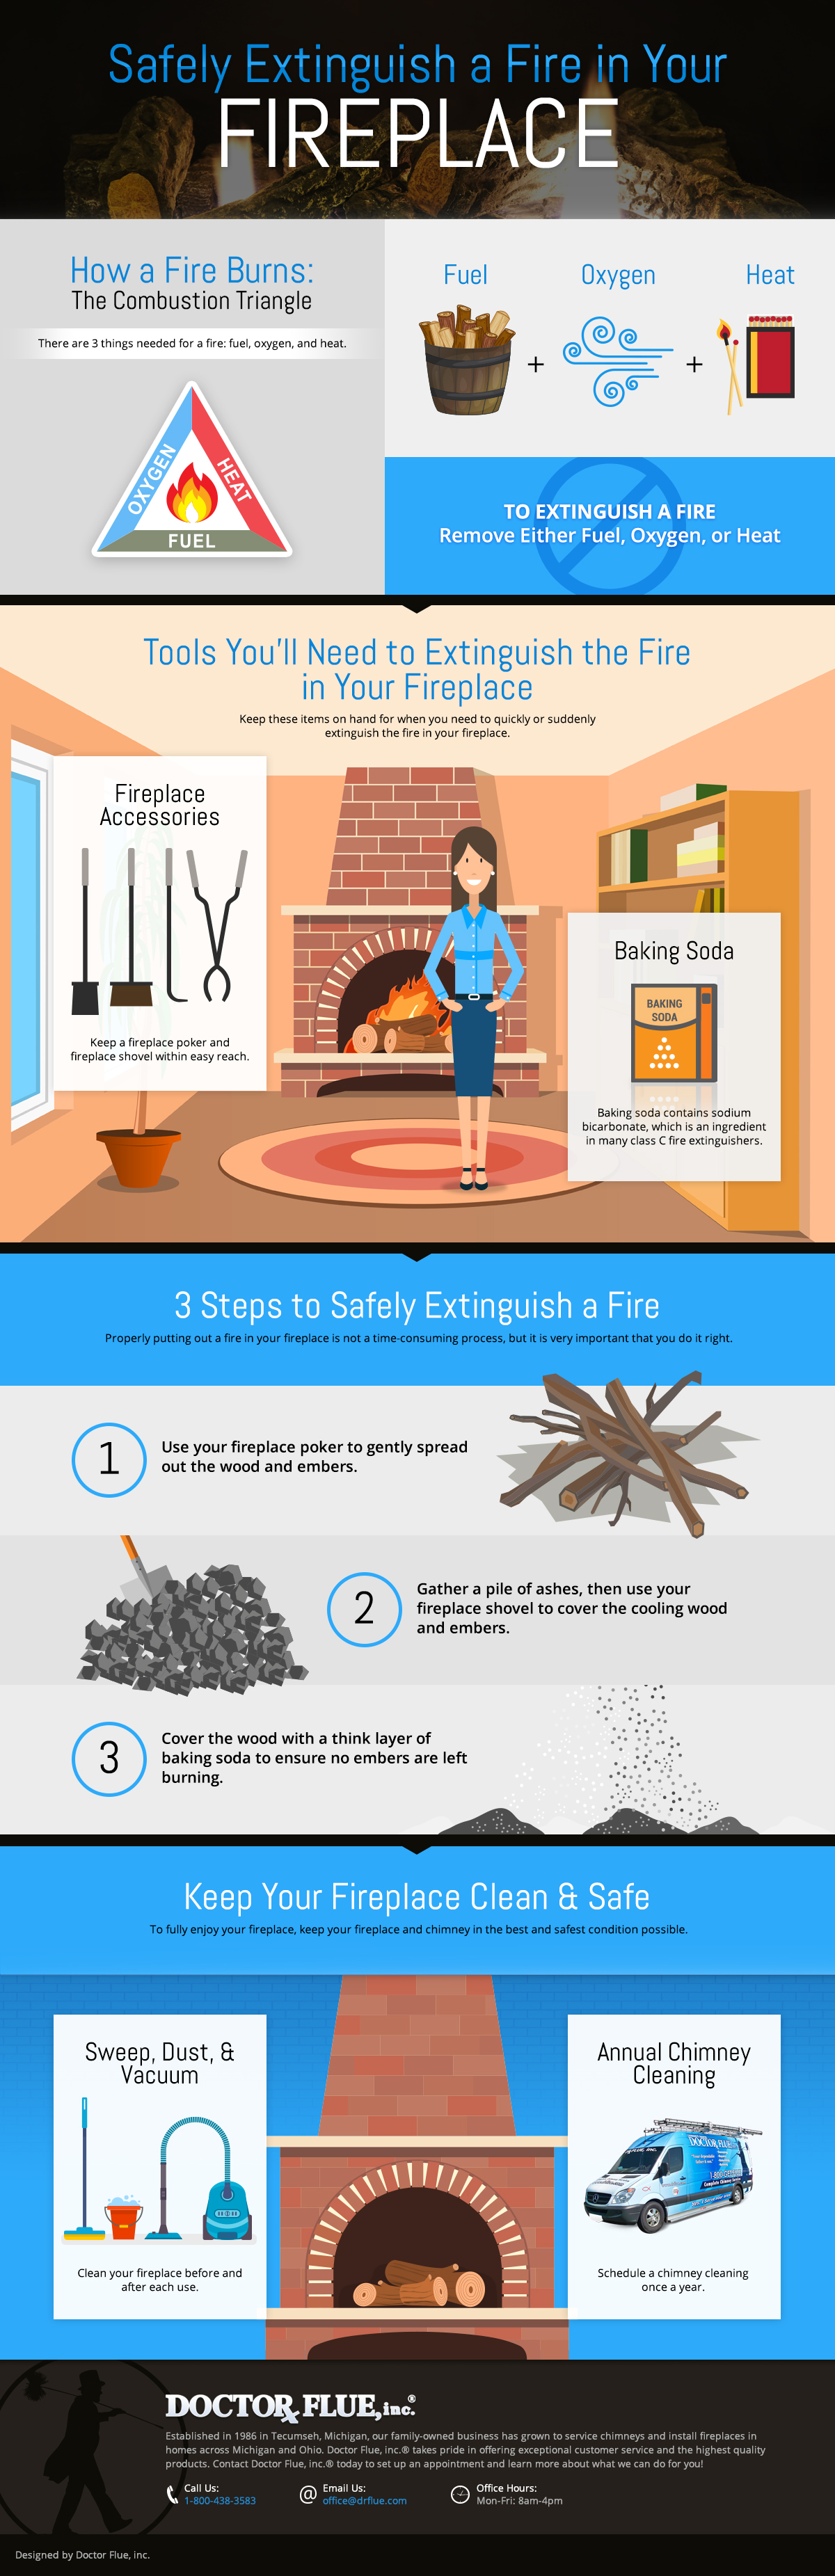 How to Put a Fireplace Fire Out? 